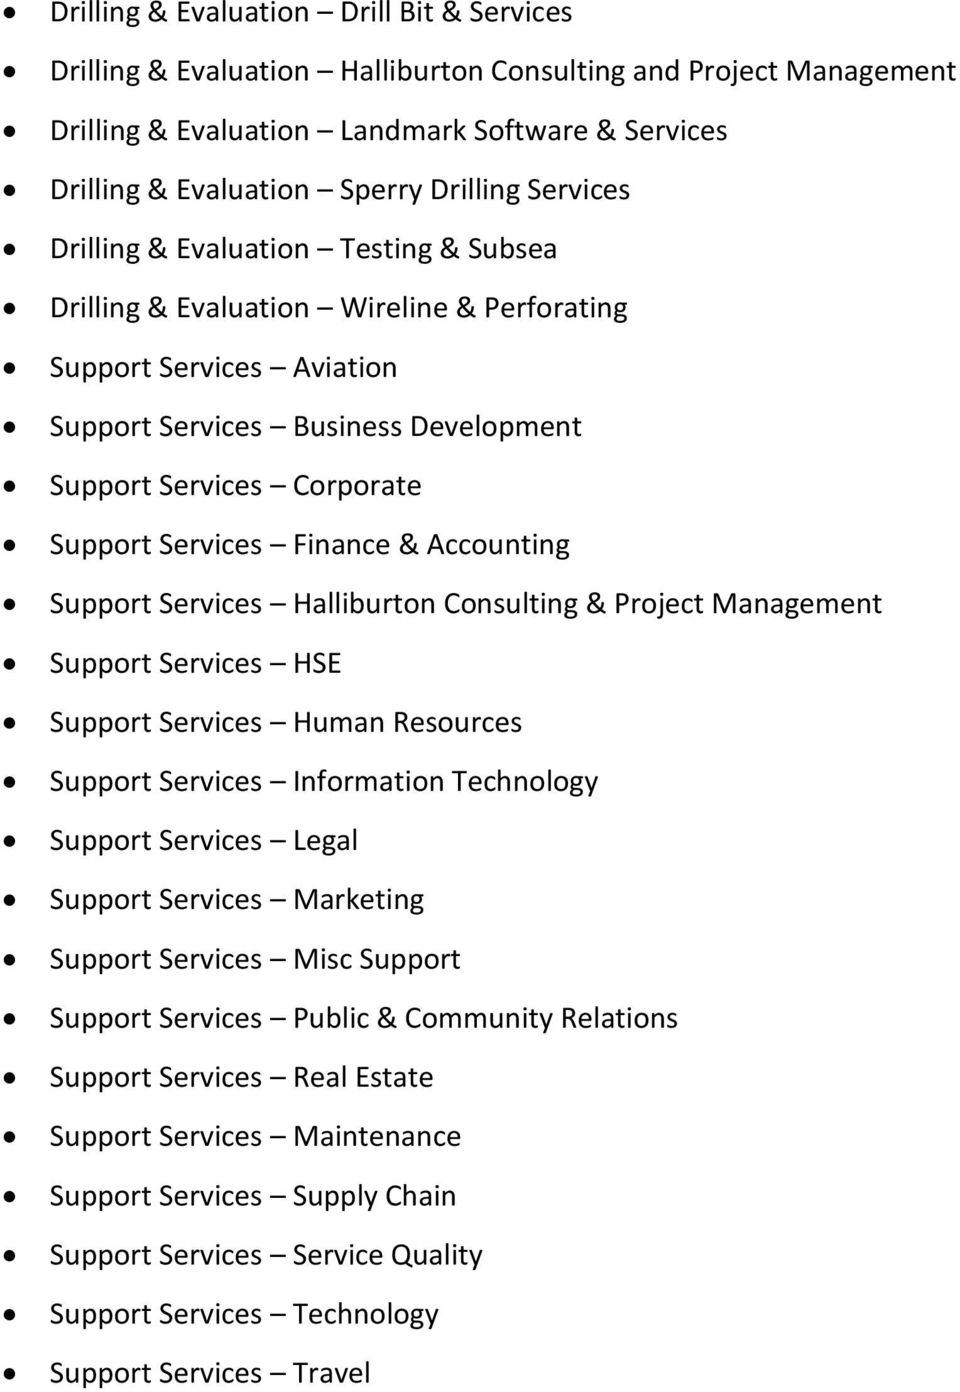 Services Finance & Accounting Support Services Halliburton Consulting & Project Management Support Services HSE Support Services Human Resources Support Services Information Technology Support